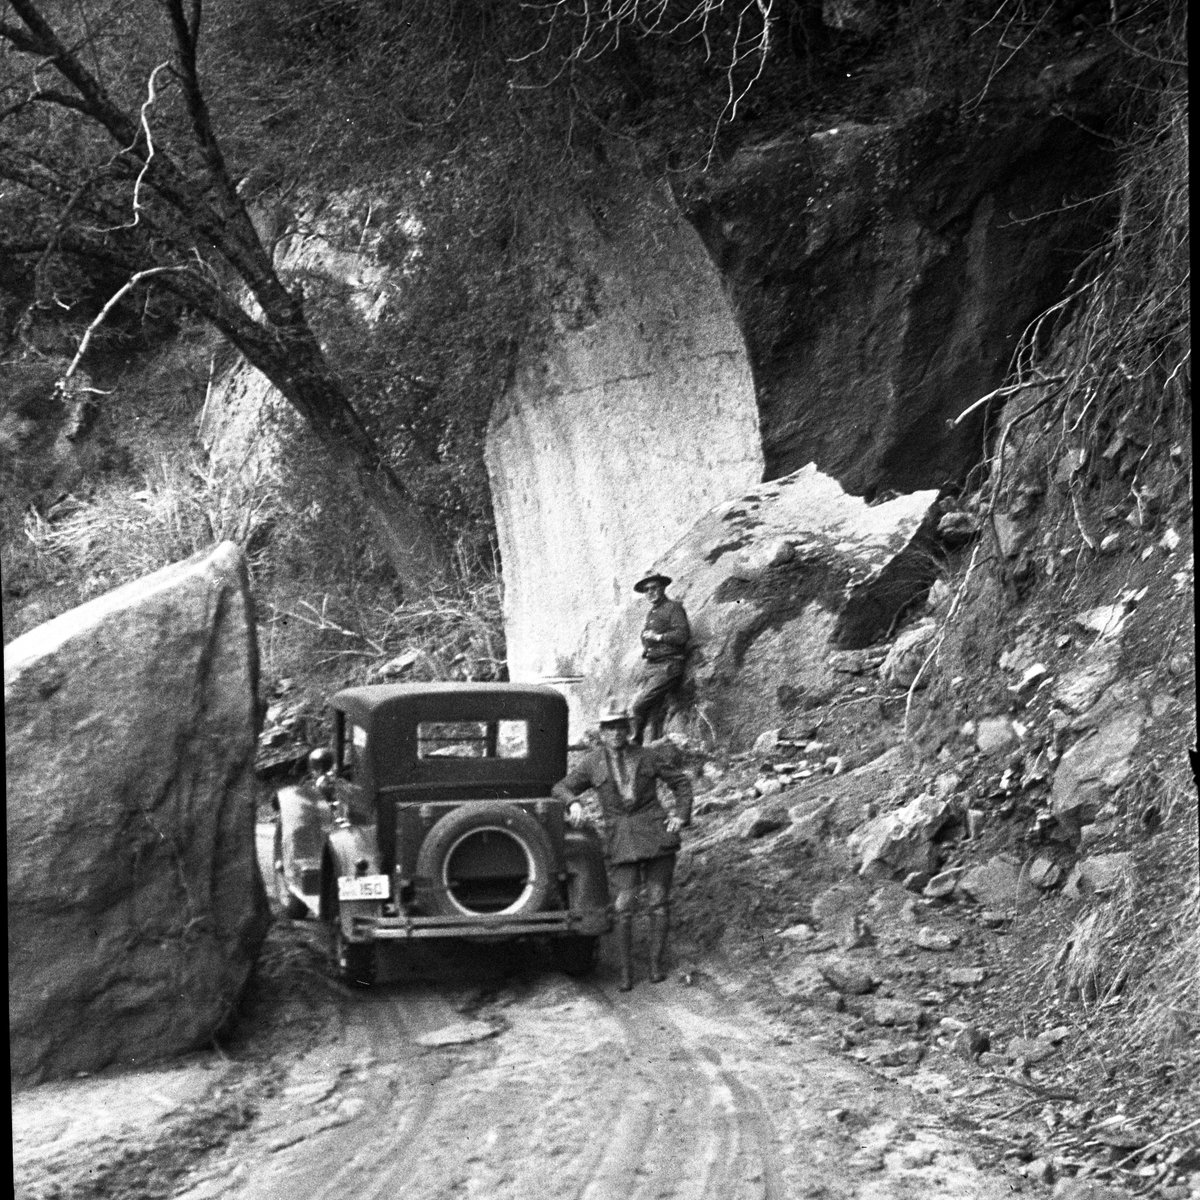 Attention, early birds: The Generals Highway will be closed below Amphitheater Point in Sequoia NP tomorrow from 7am - 8am, in the vicinity of 'One Shot Rock,' for a blasting operation. Here is 'One Shot Rock', the Generals Highway, and engineer N.M. Austin a few years back!